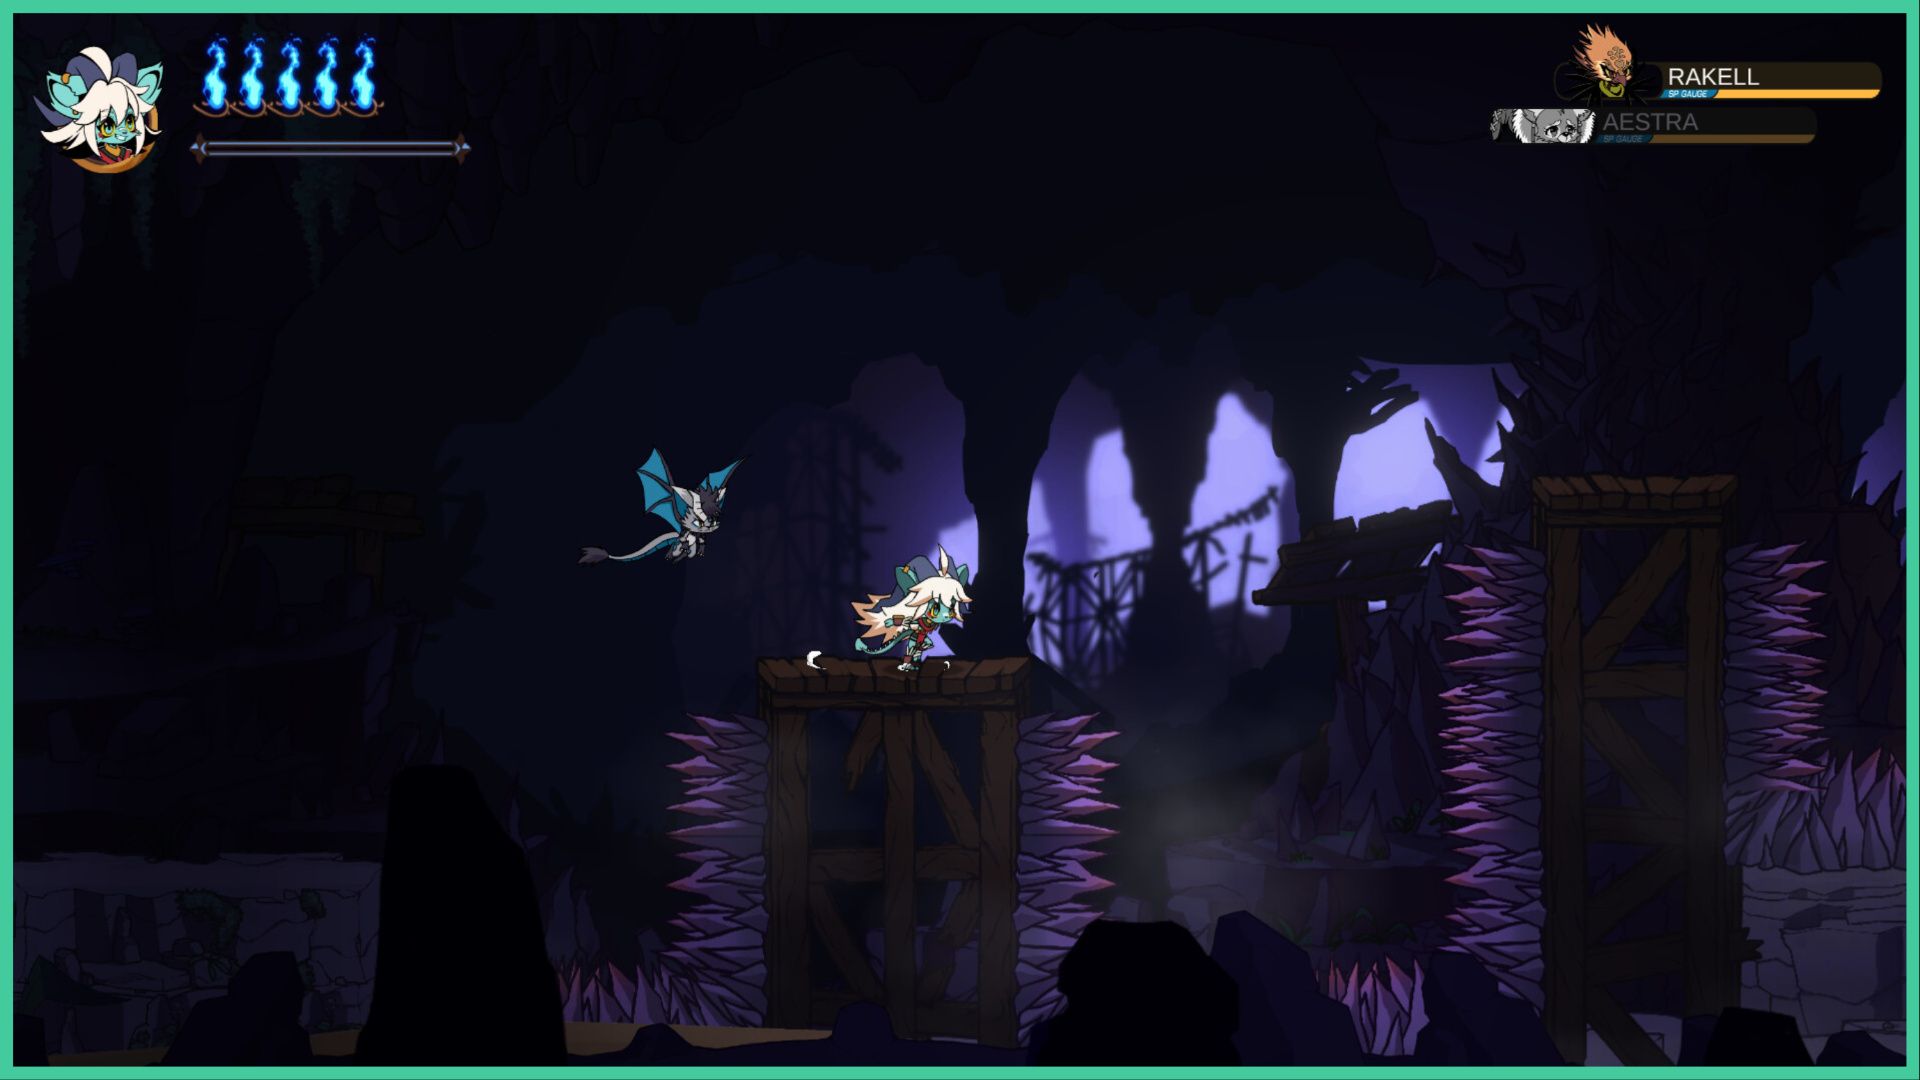 feature image for our dewborne dawn news, the image features a screenshot from the game of dew and her flying companion making their wau across wooden platforms that are covered in spikes, with broken wooden structures and rock formations in the distance, they seem to be inside a dungeon of some sorts